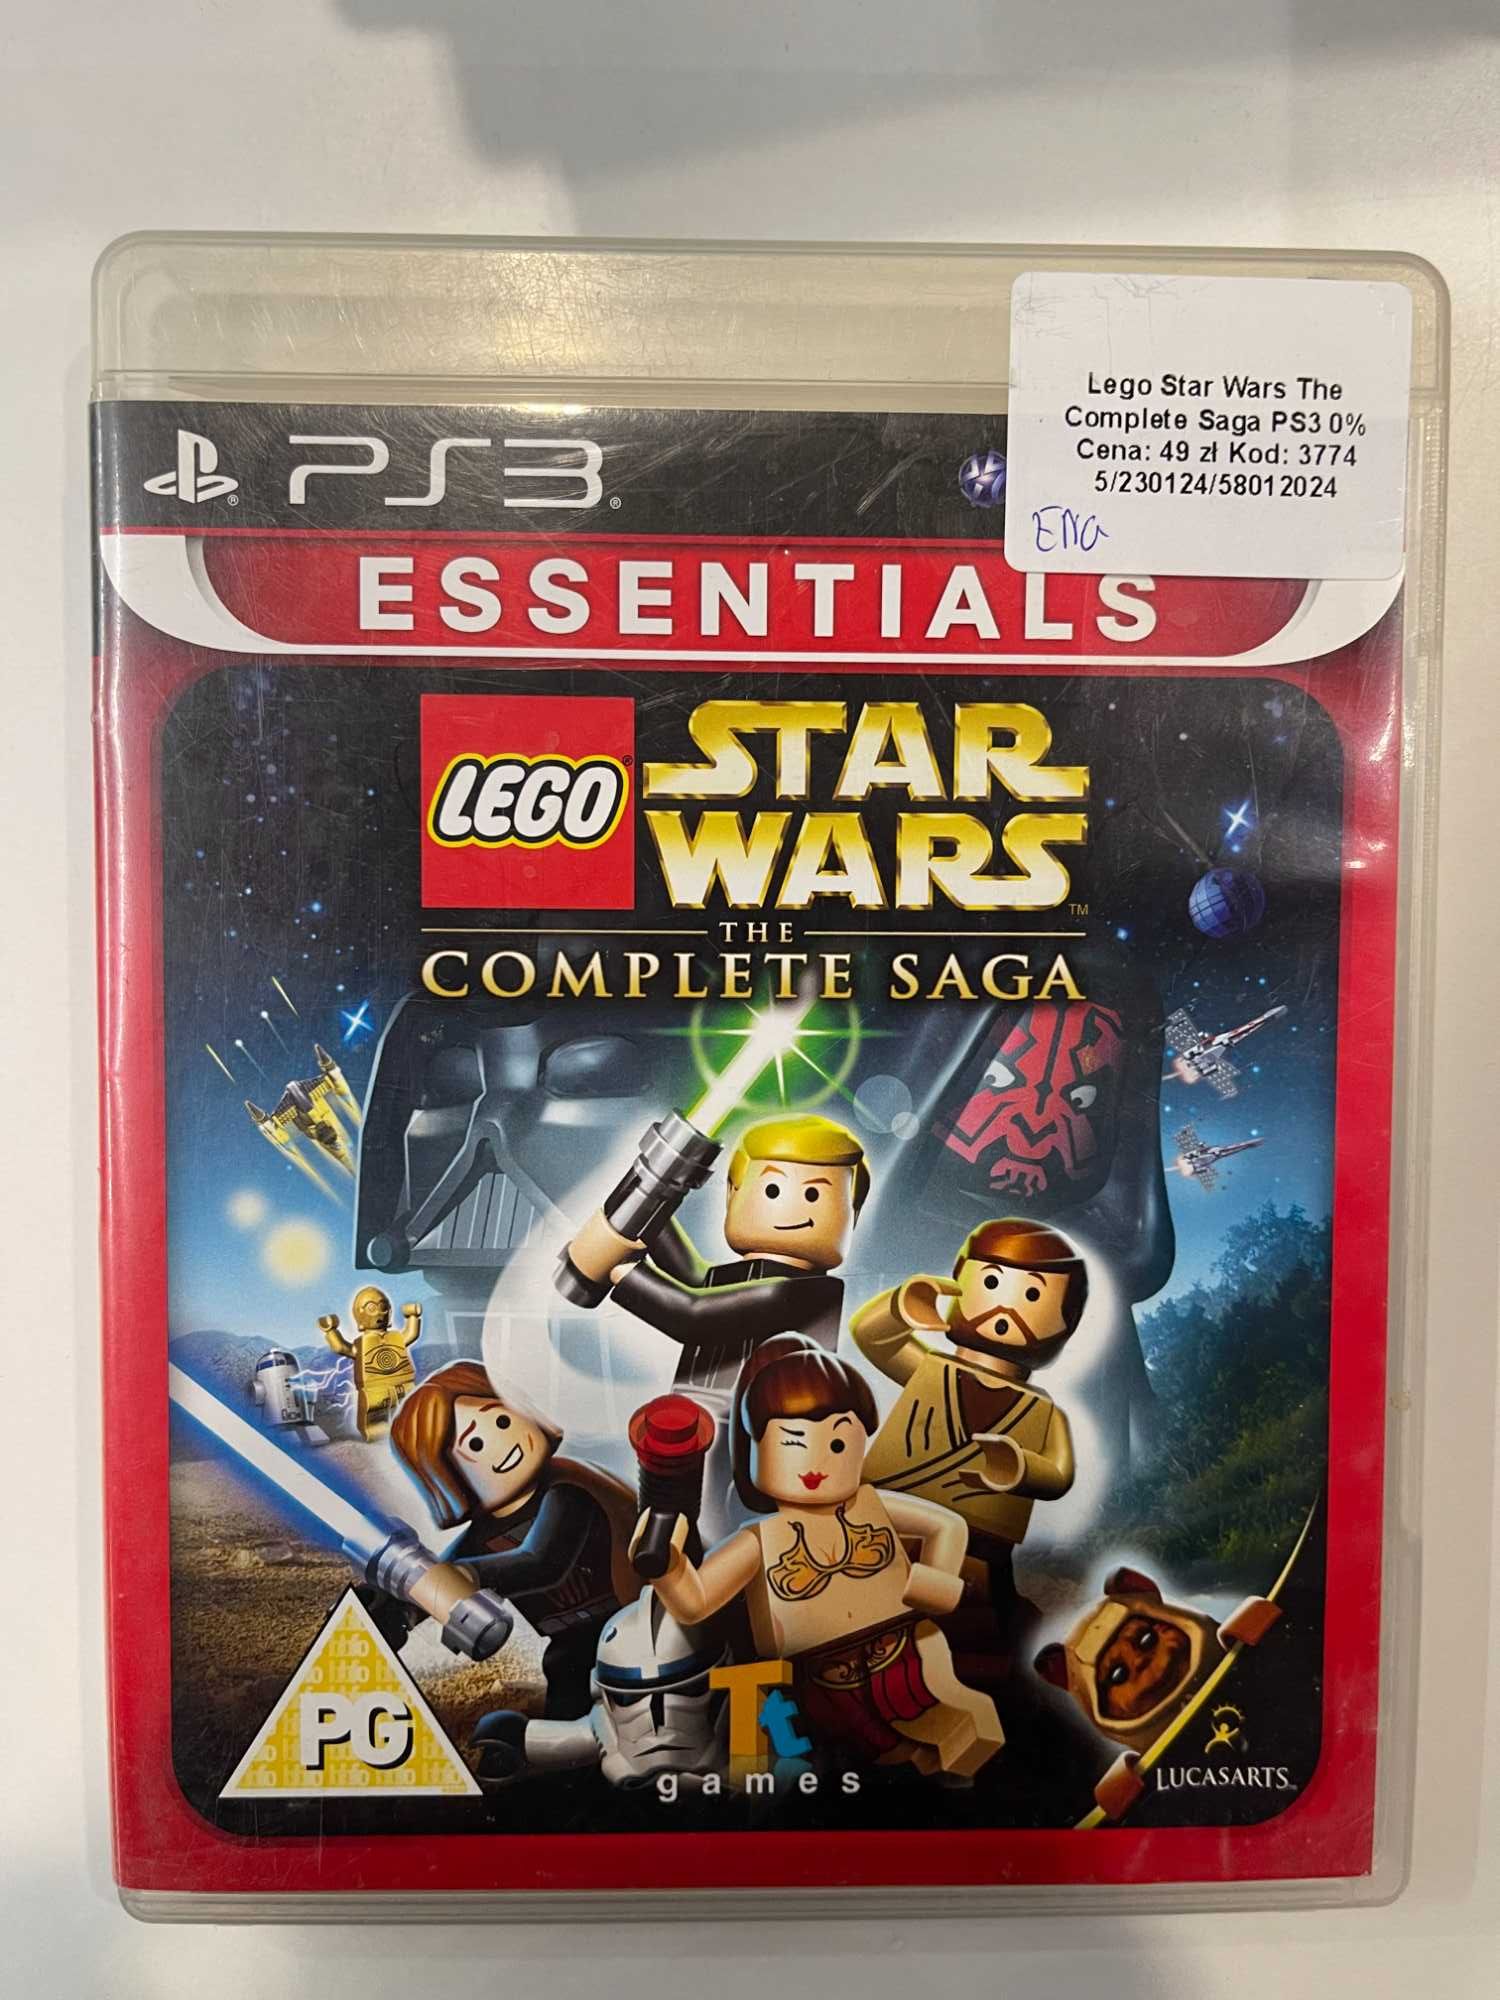 Lego Star Wars The Complete Saga PS3 Playstation 3